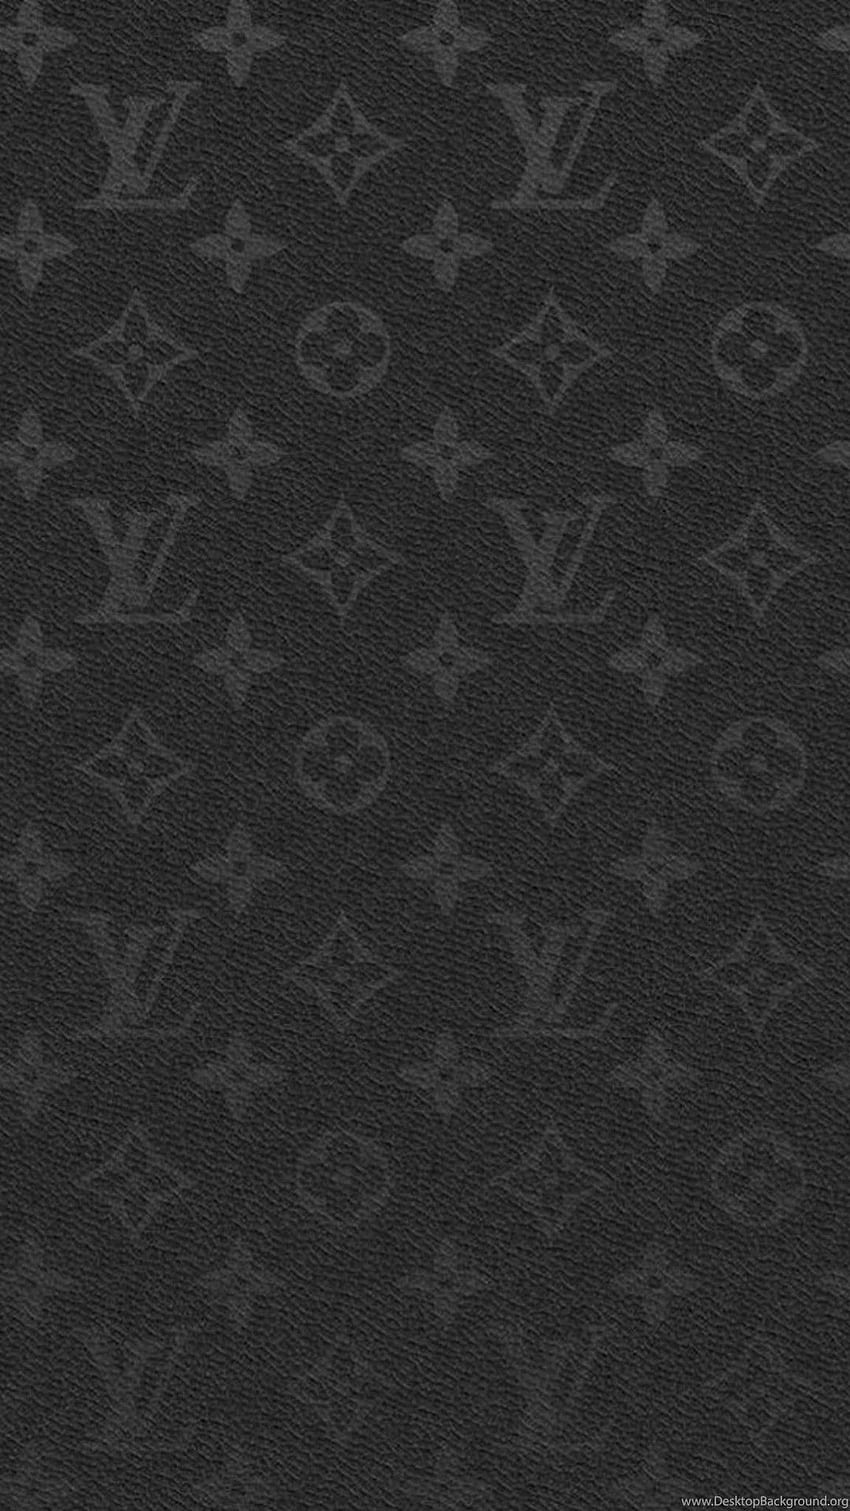 Supreme Lv iPhone. English as a Second Language at Rice University, Louis Vuitton Leather HD phone wallpaper